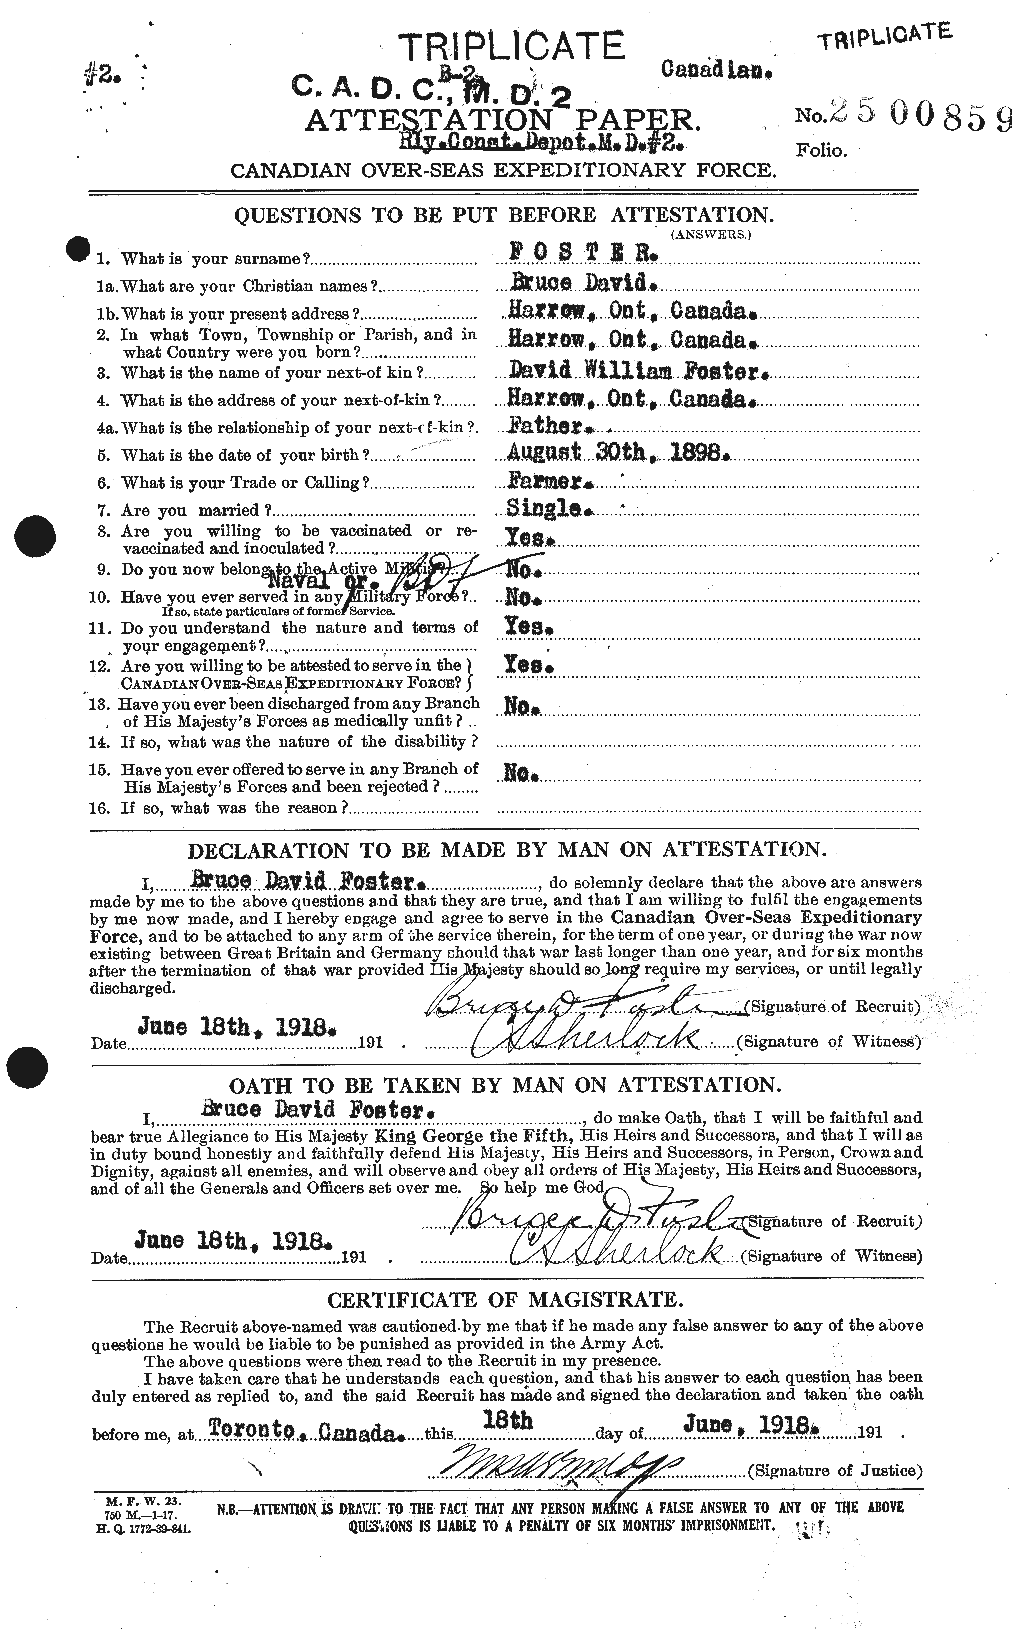 Personnel Records of the First World War - CEF 330490a